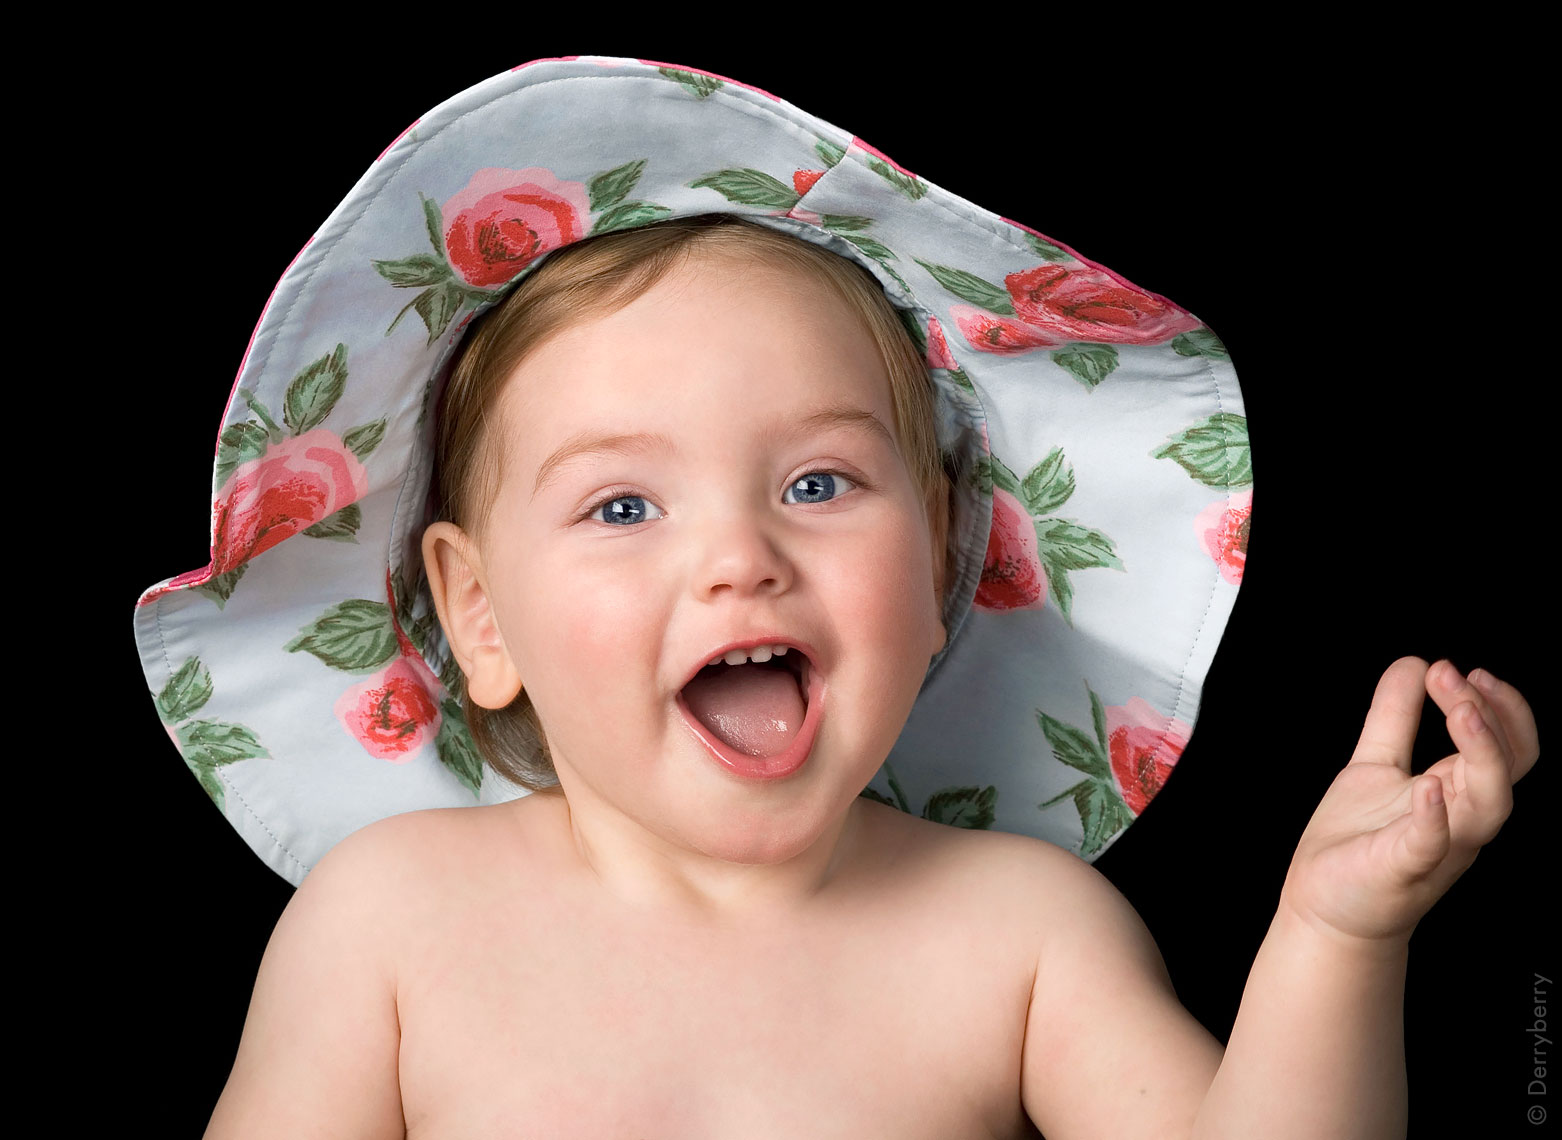 Portrait of a pretty and happy baby girl with a flowered hat on holding her hand up